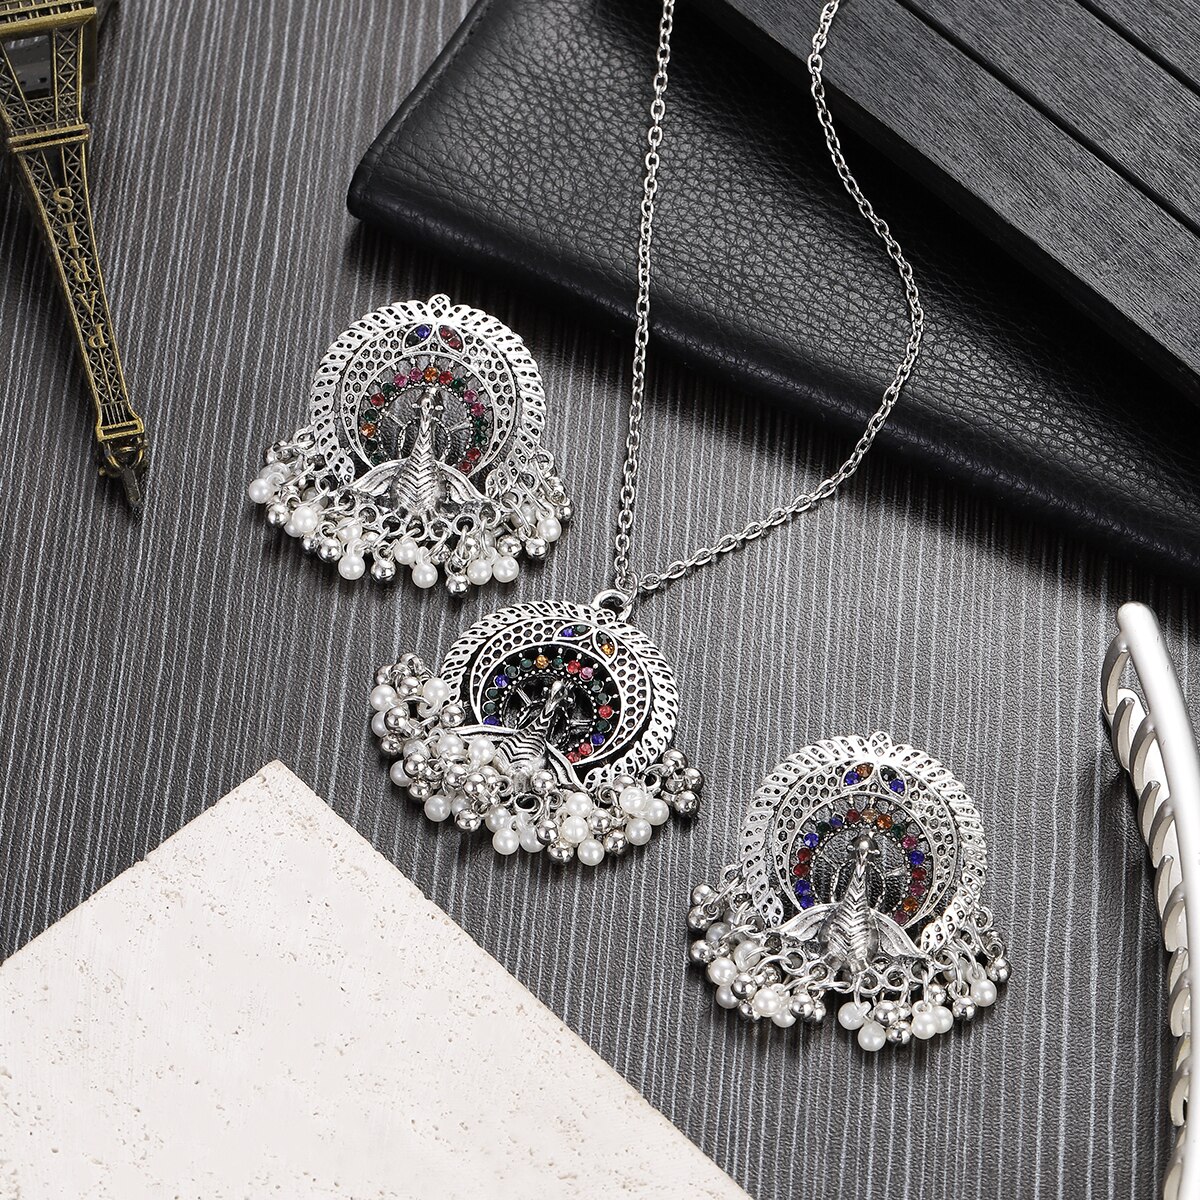 Vintage-Silver-Color-Jewelry-Sets-for-Women-Accessories-Ethnic-Geometric-Peacock-Crystal-Pendant-Nec-1005004941302824-10